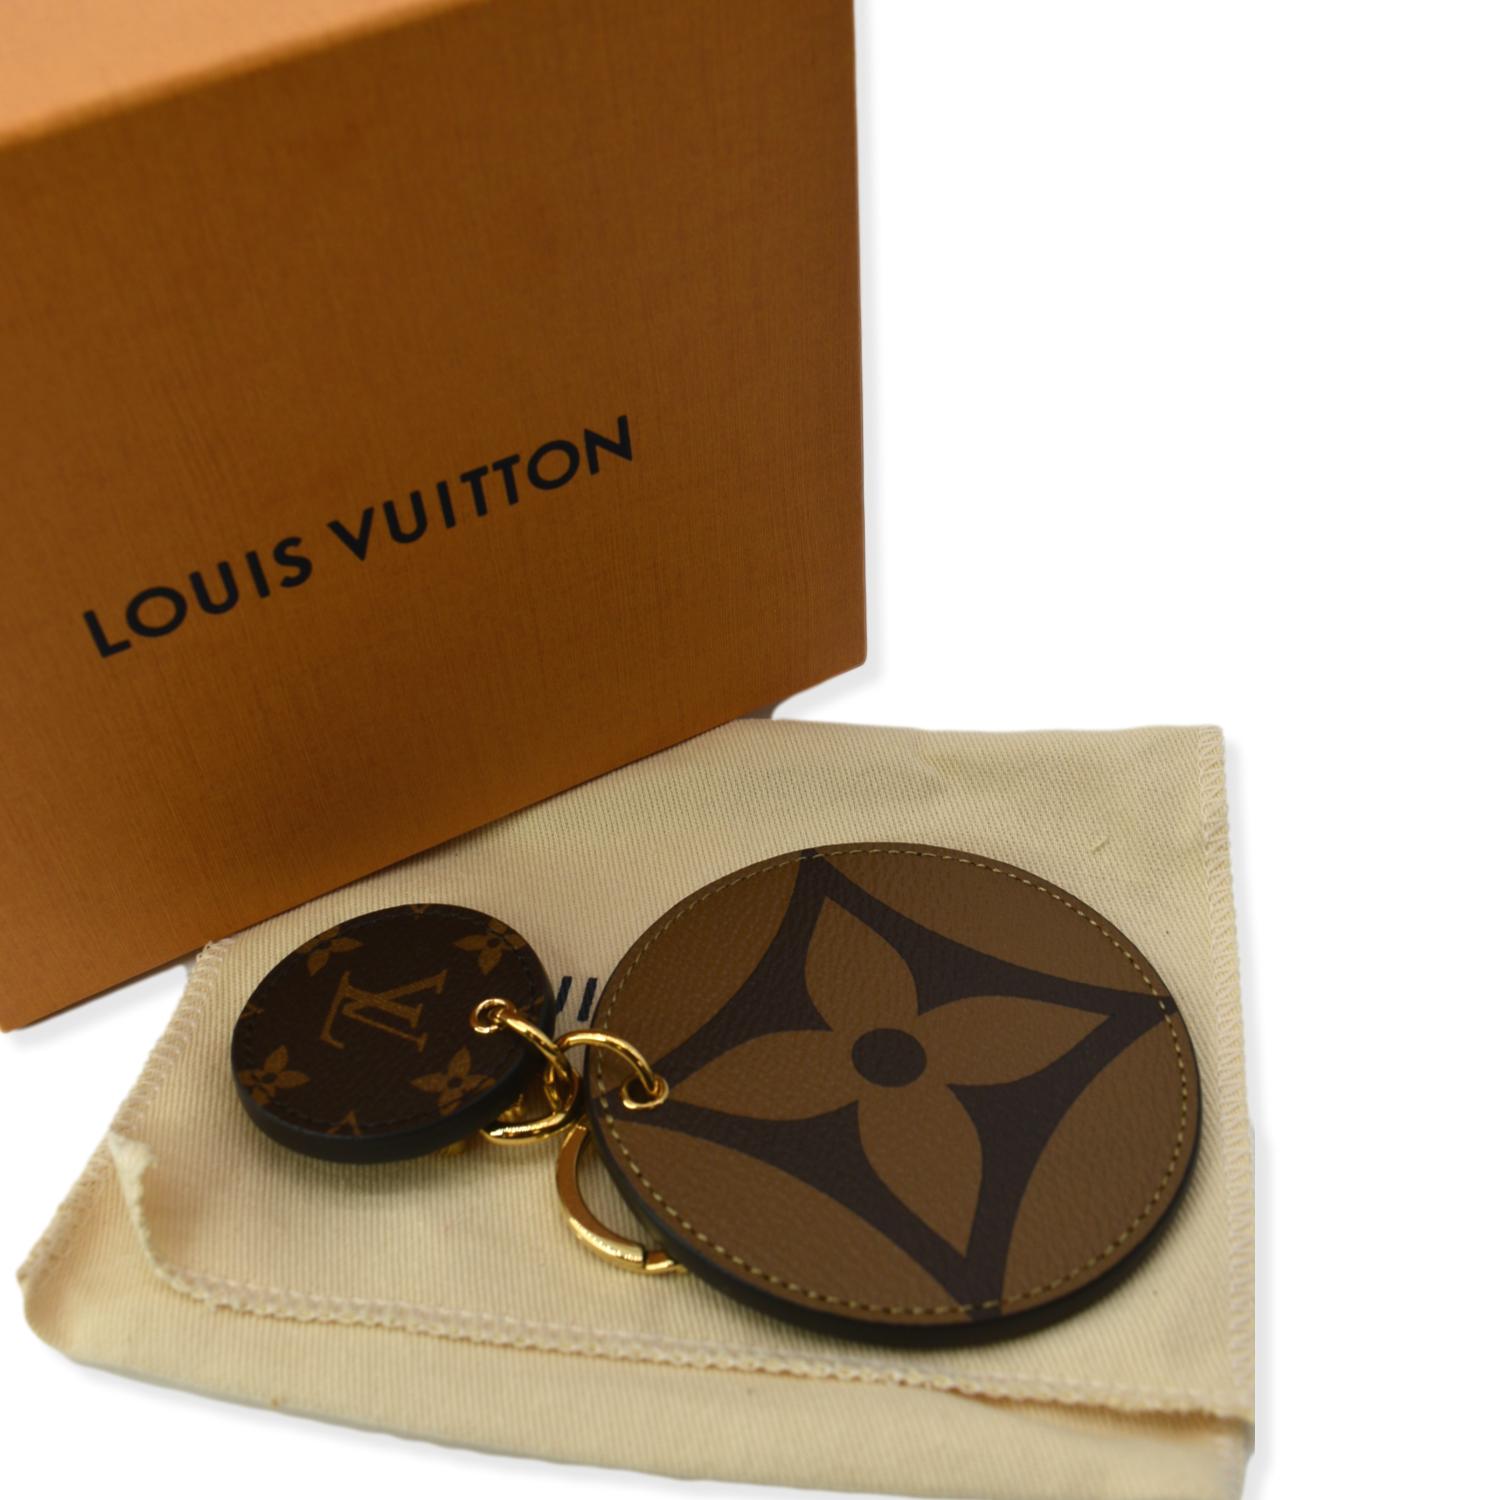 Louis Vuitton Squared Pouch Key Holder and Bag Charm